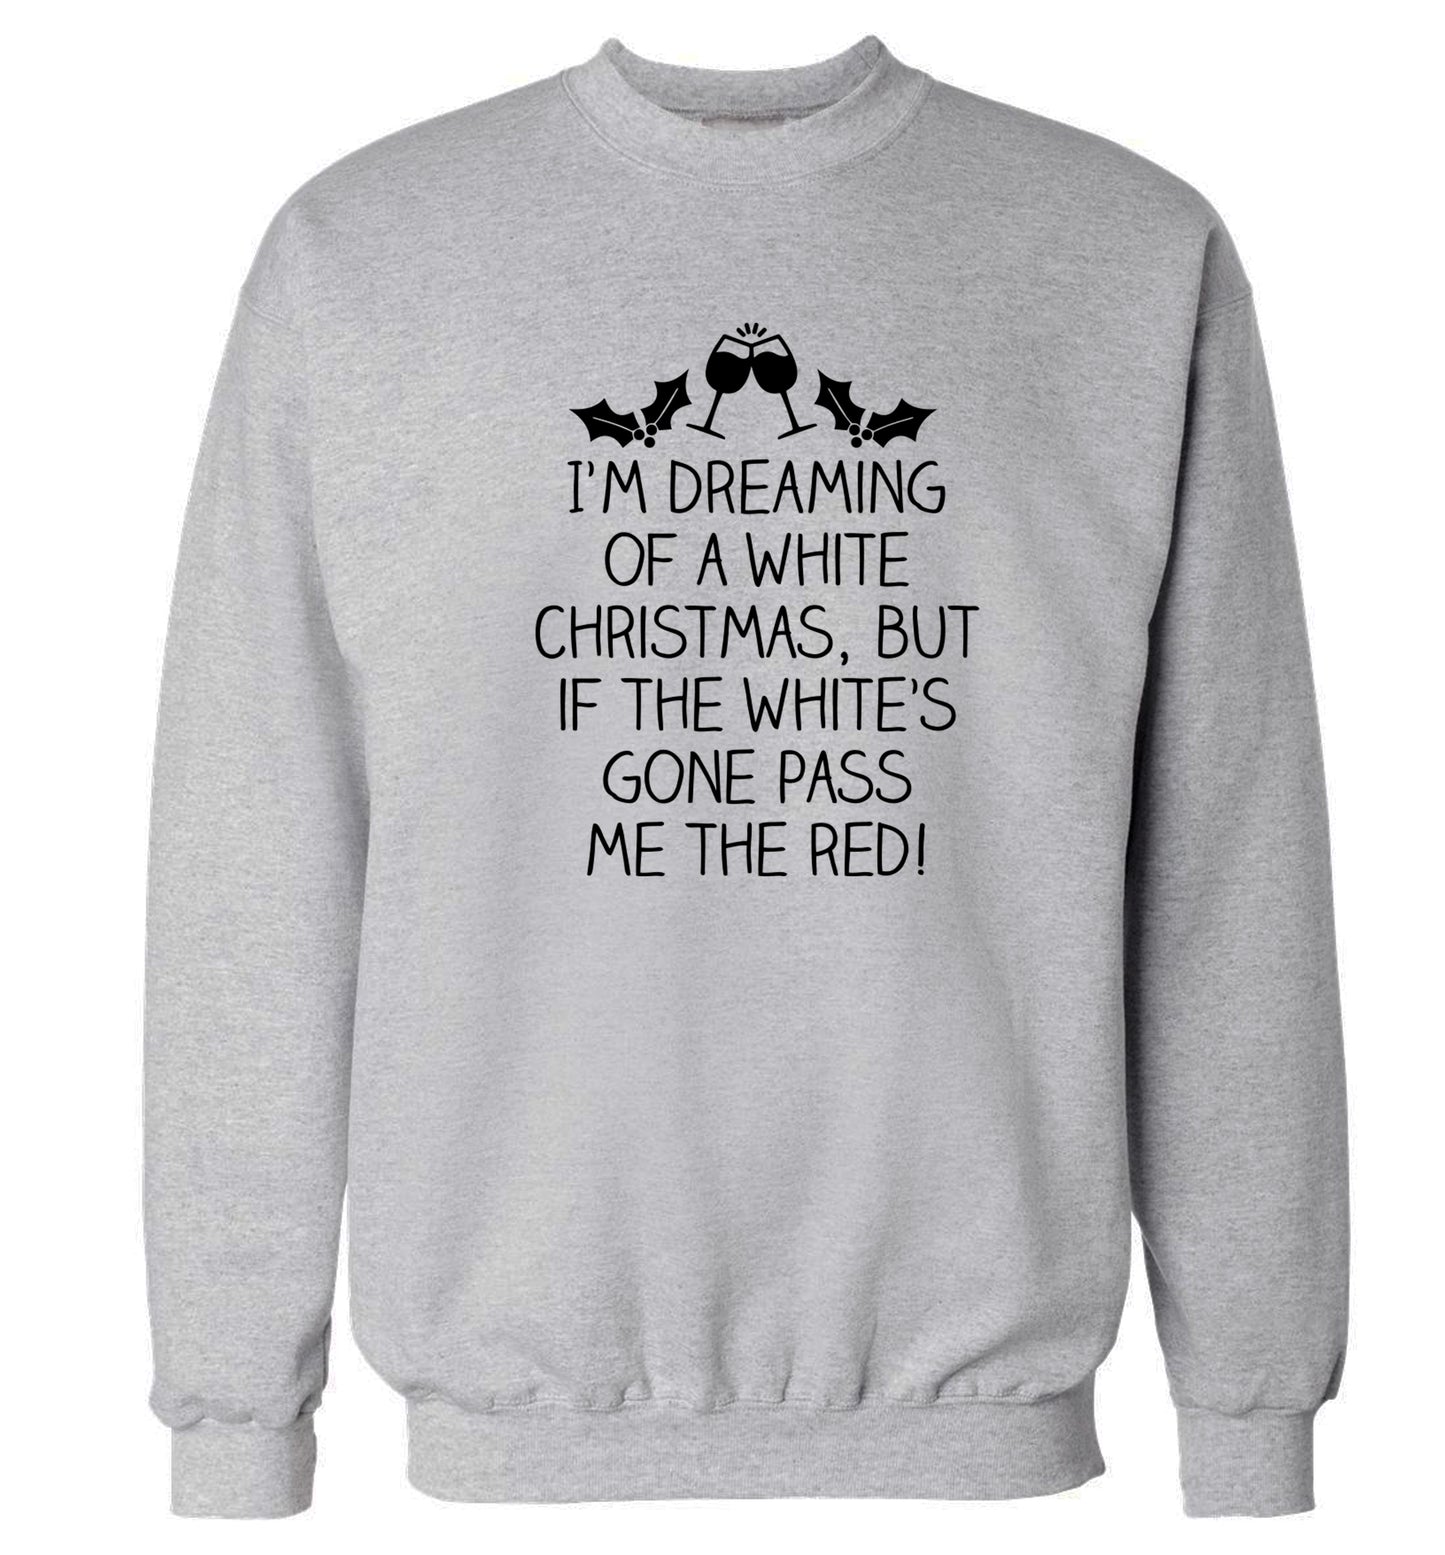 I'm dreaming of a white christmas, but if the white's gone pass me the red! Adult's unisex grey Sweater 2XL